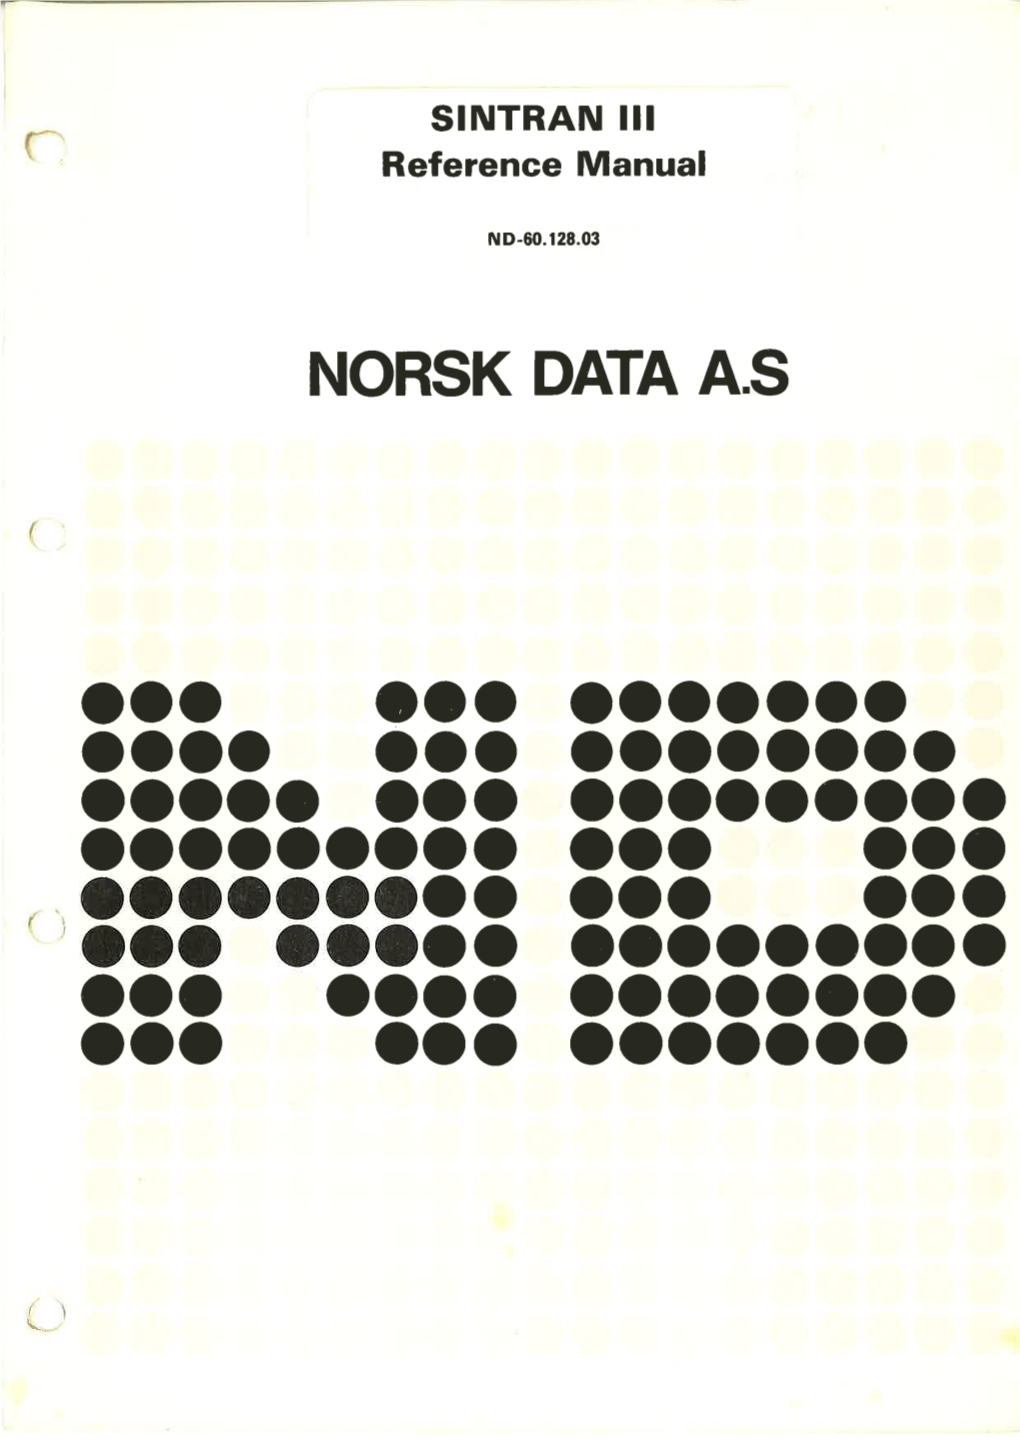 NORSK DATA AS SINTRAN Iii Reference Manual